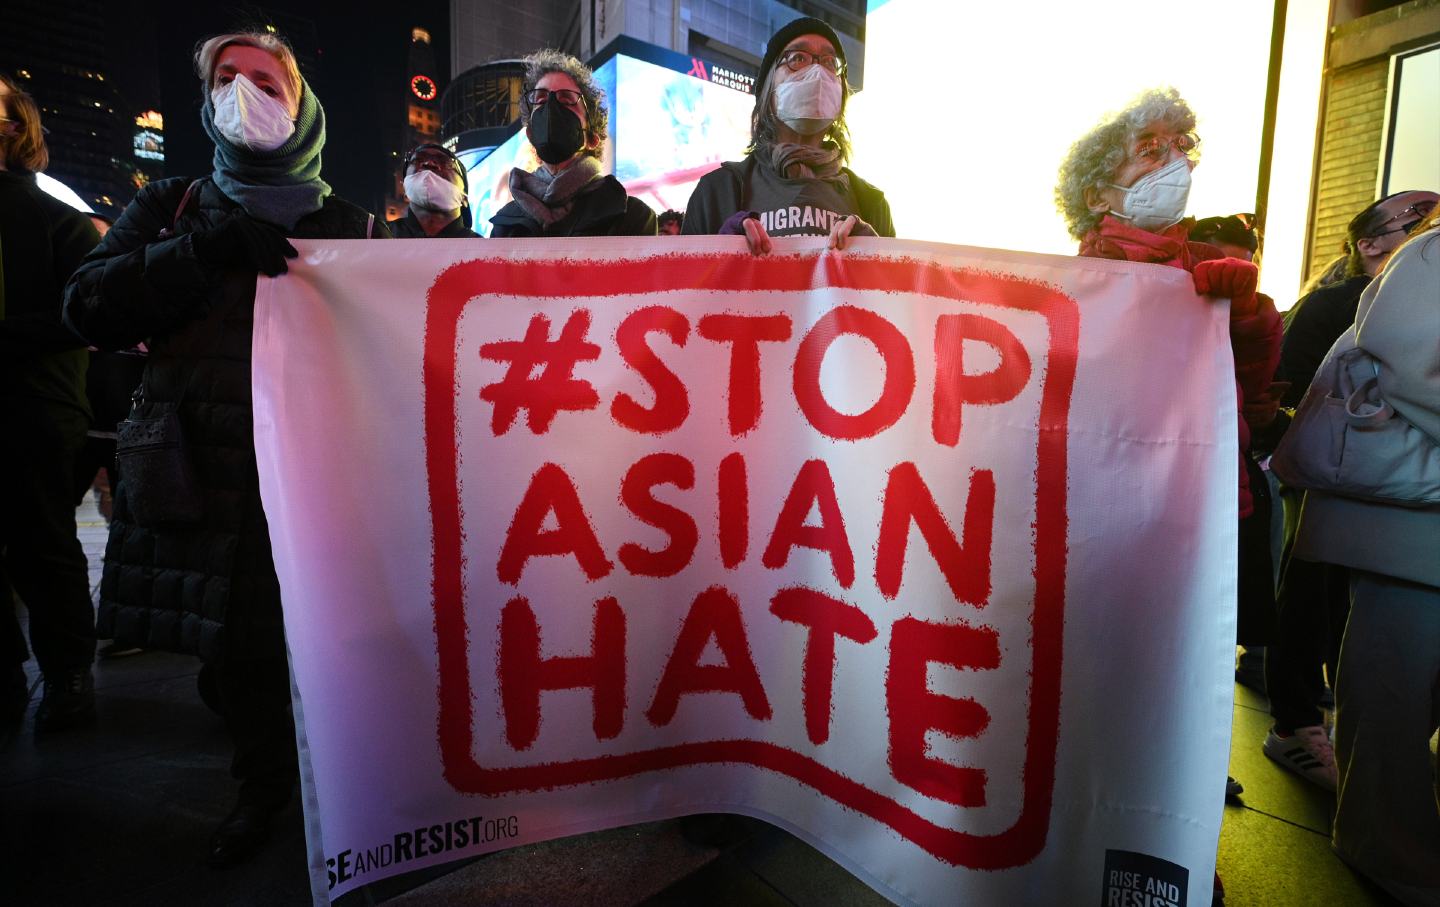 Protesters attend a Justice for Asian Women rally in Times Square. They are holding a #StopAsianHate sign.